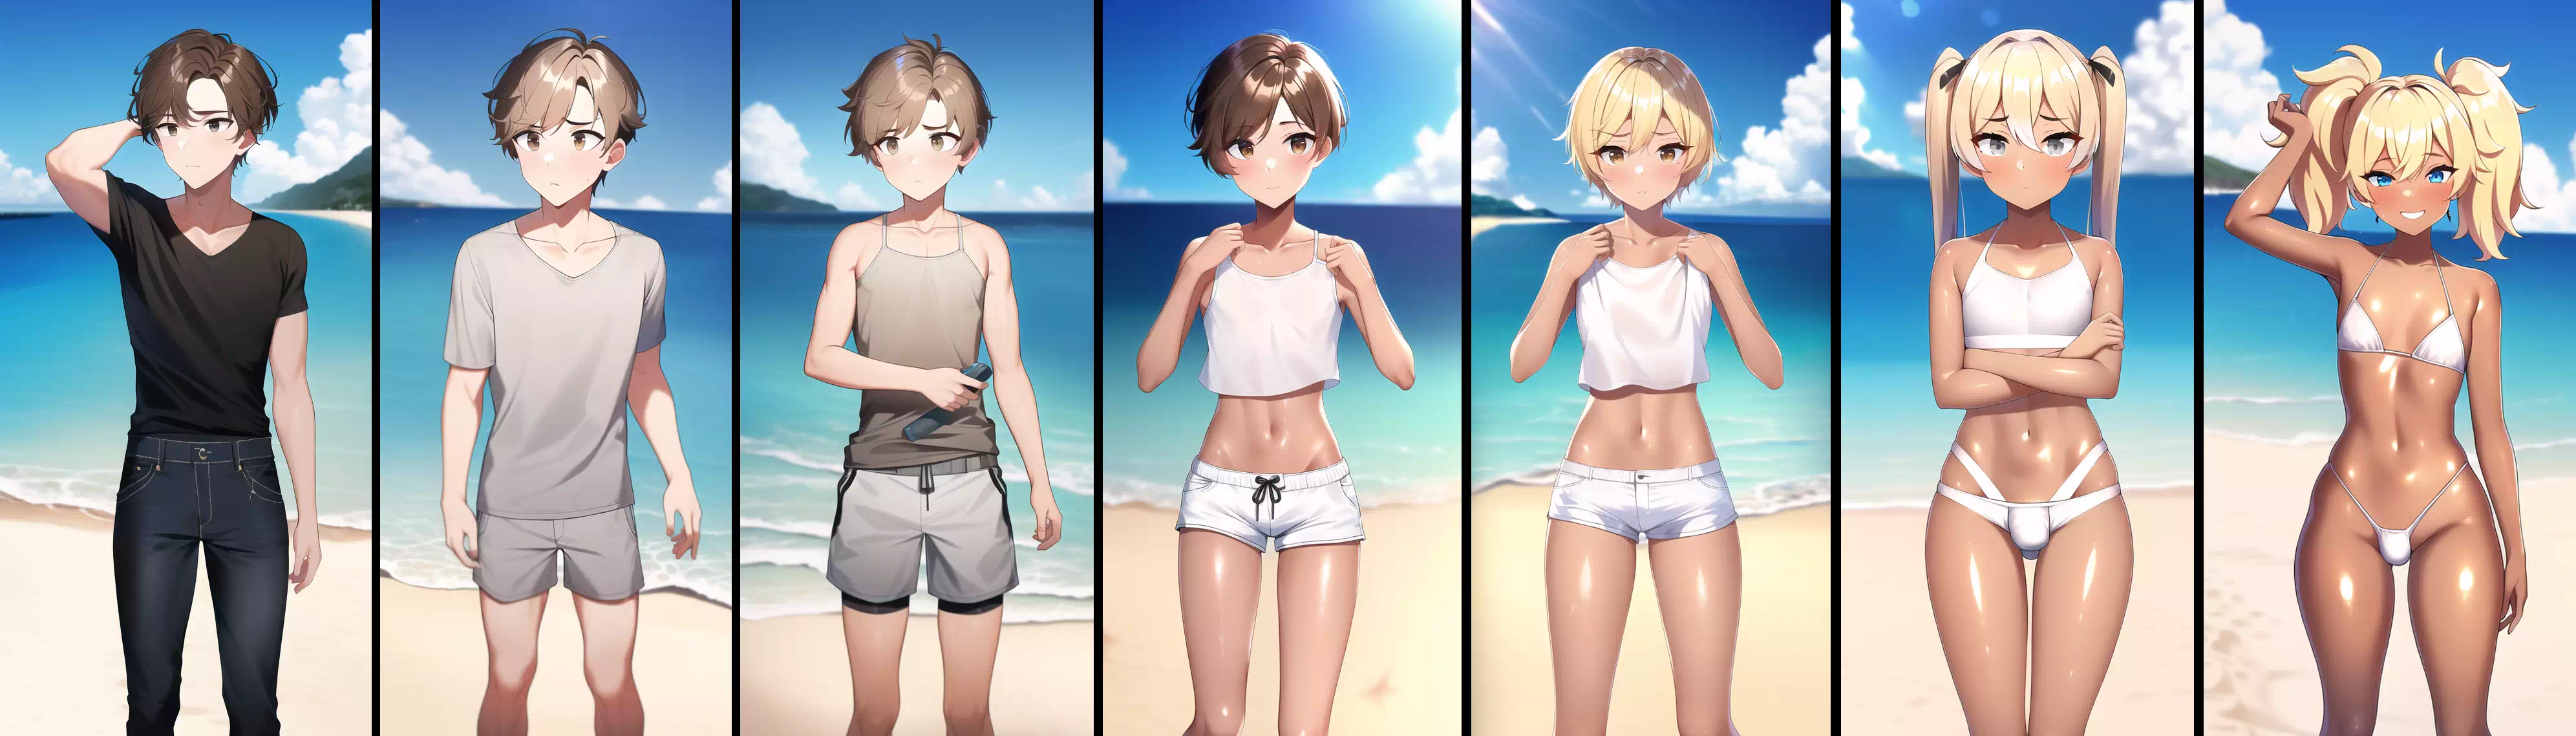 Welcome to Femboy Beach!